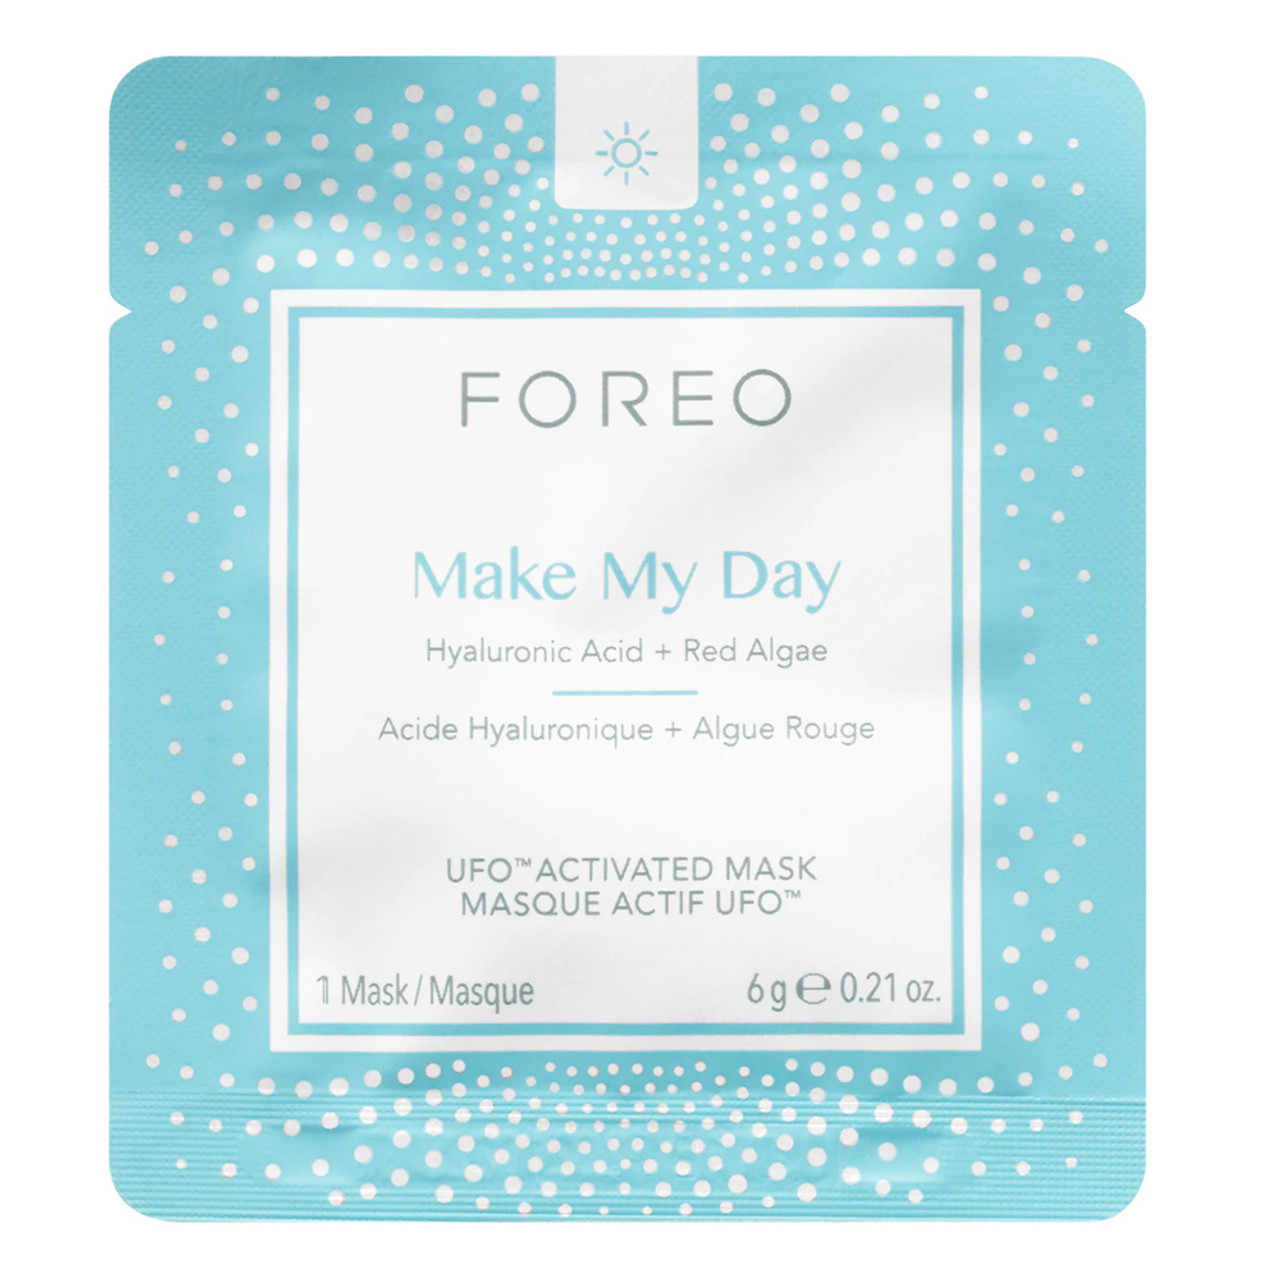 Foreo UFO Activated Masks - Make My Day (7-Pk)